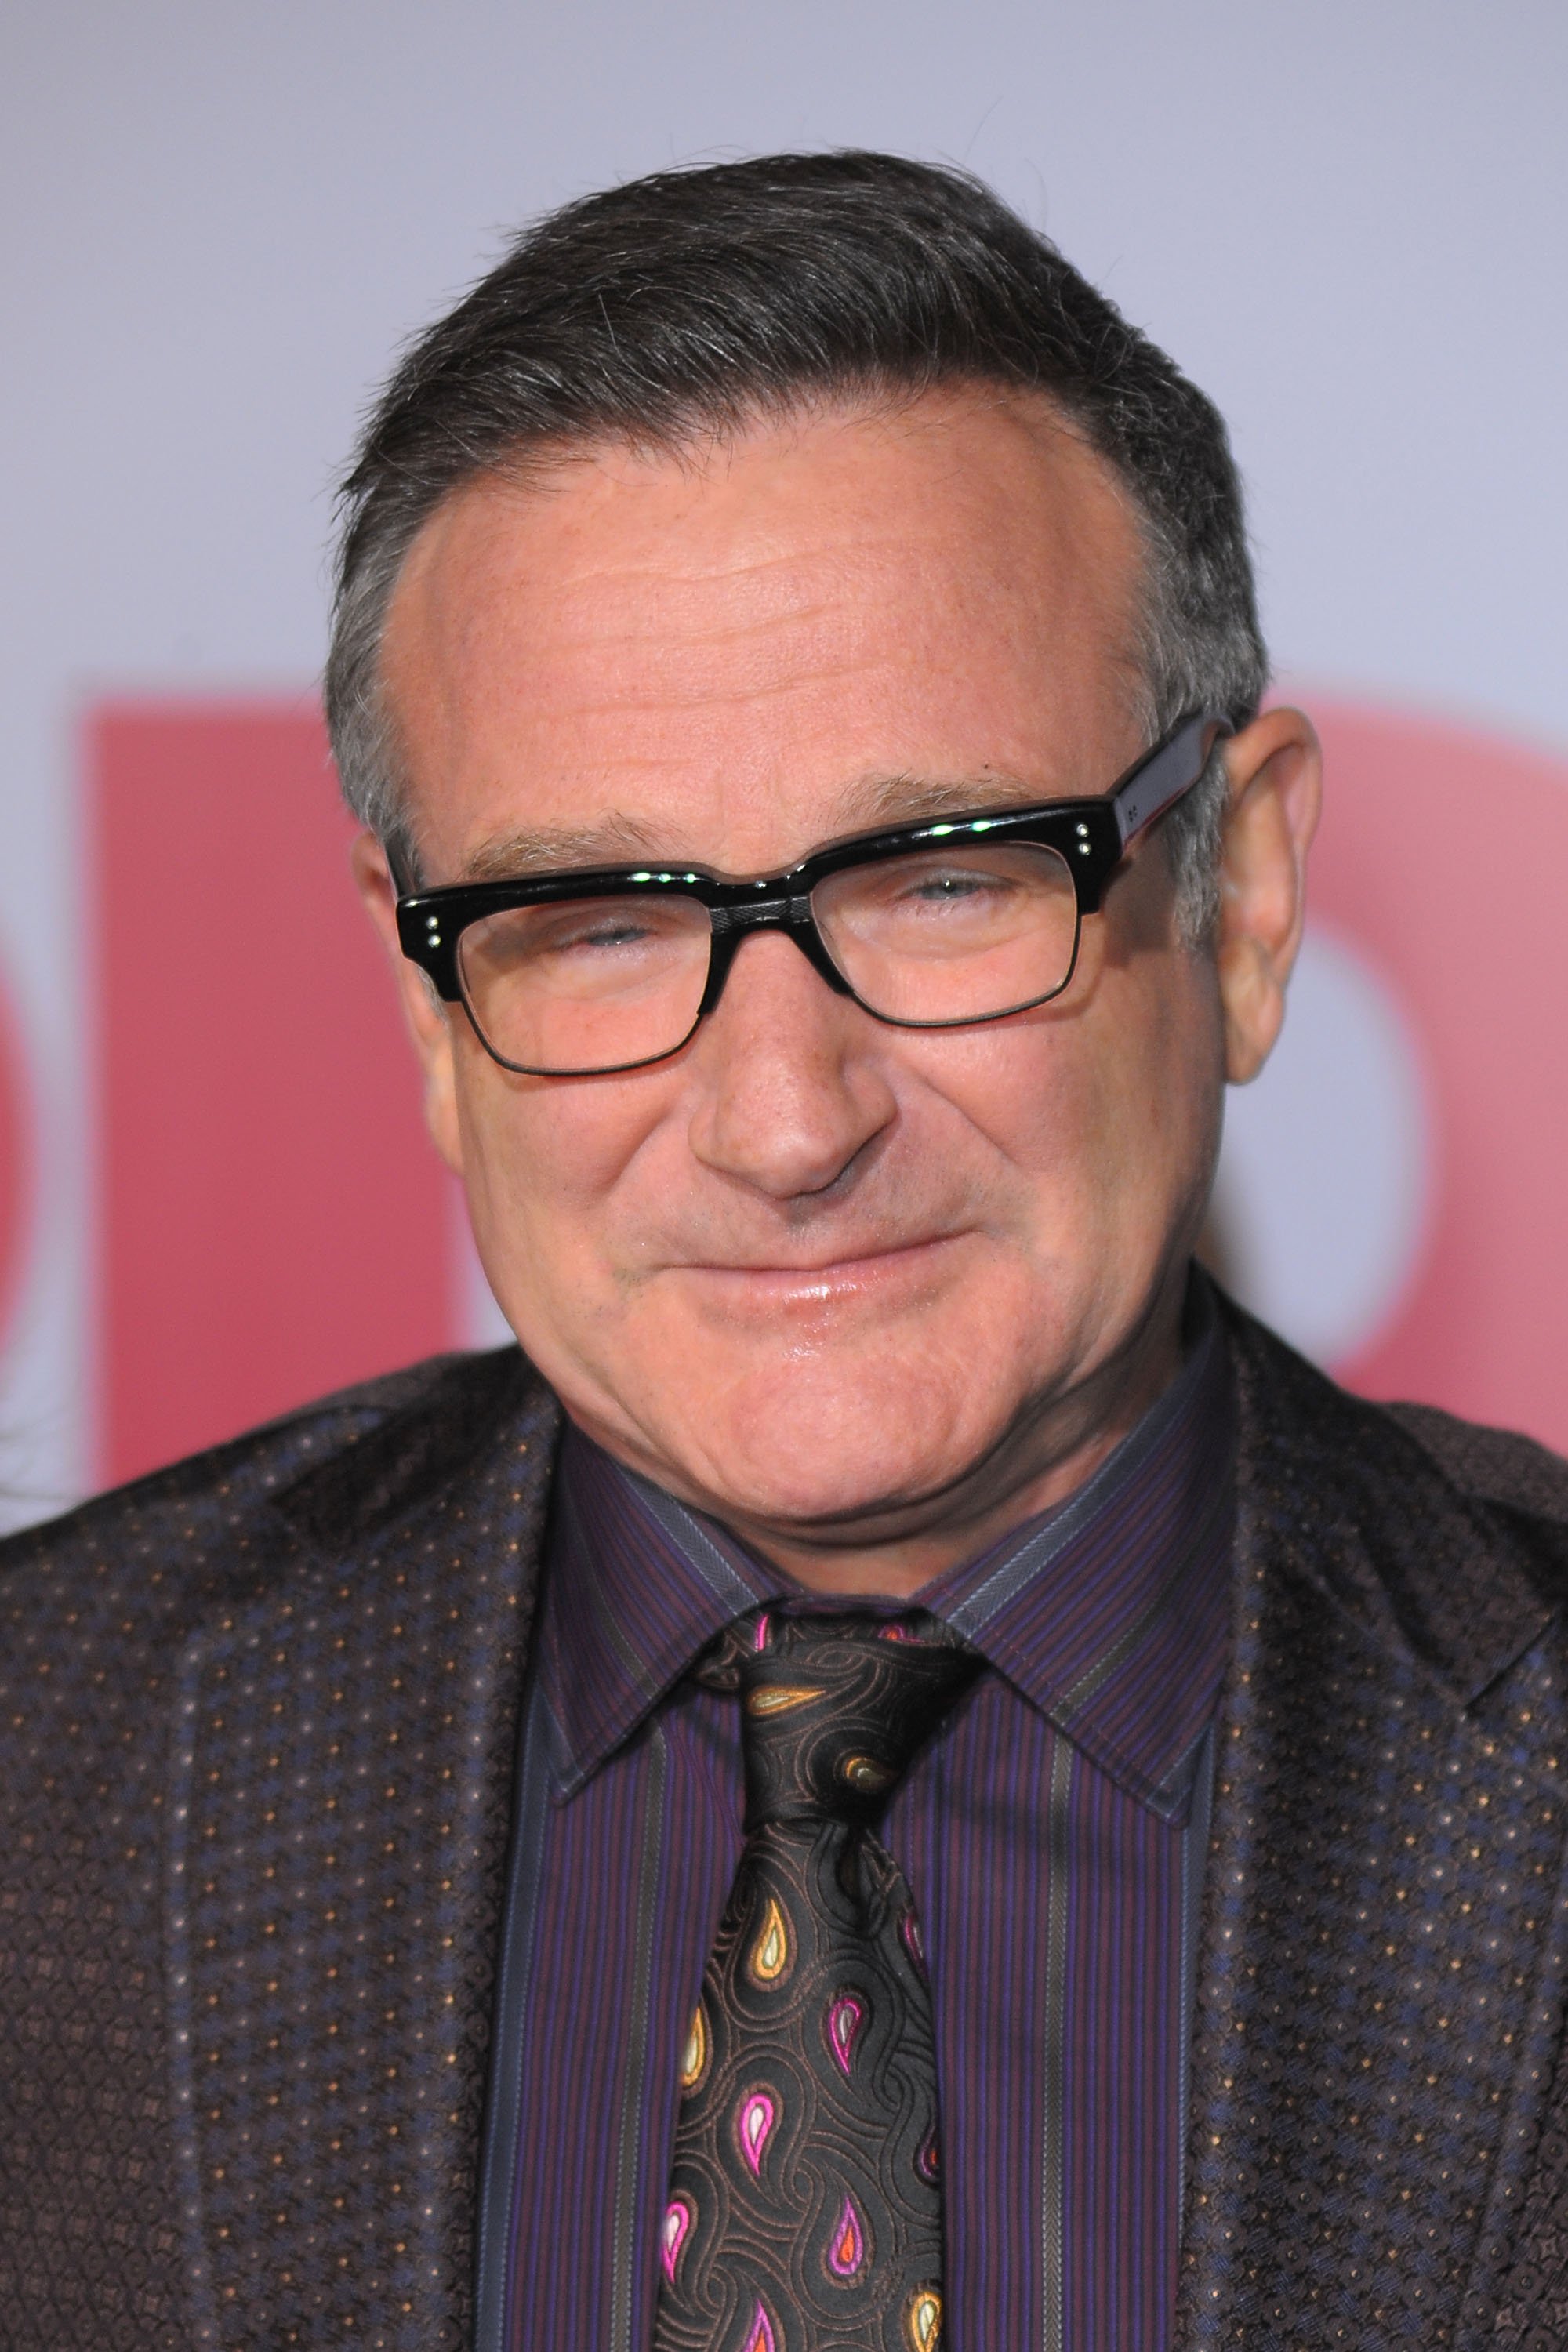 Robin Williams attends the premiere of "Old Dogs" in Hollywood, California on November 9, 2009 | Photo: Getty Images